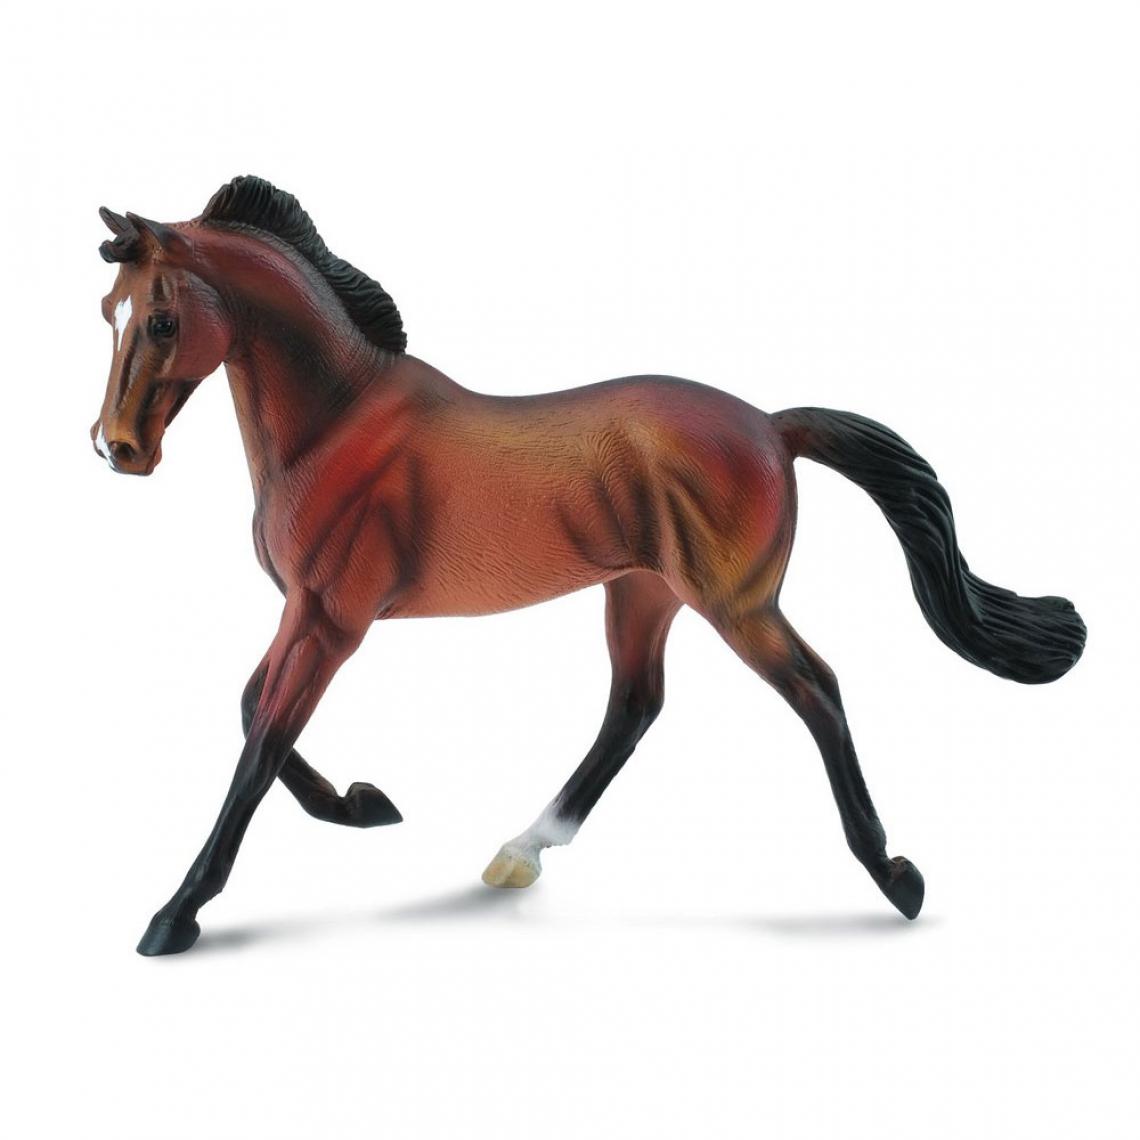 Figurines Collecta - Figurine Cheval : Jument Pure - Animaux